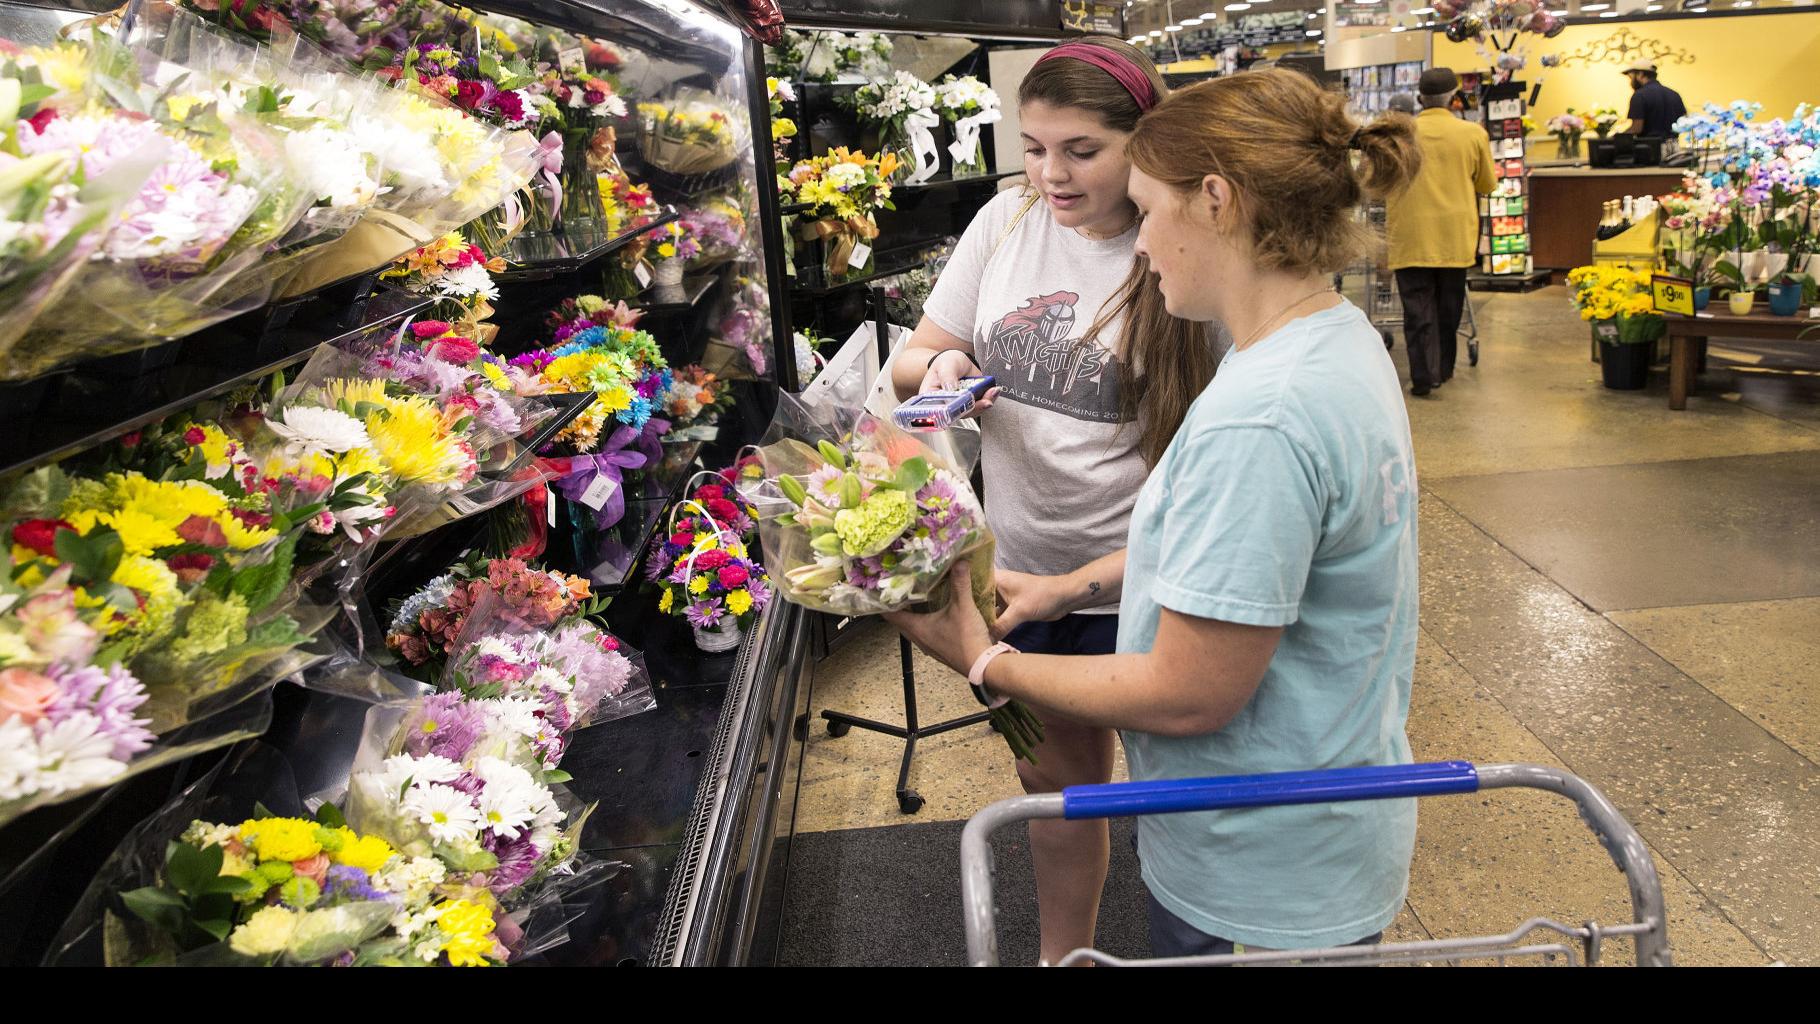 Avoiding The Grocery Checkout Line Kroger Debuts Self Scan Bag Go Technology At Willow Lawn Store Business News Richmond Com